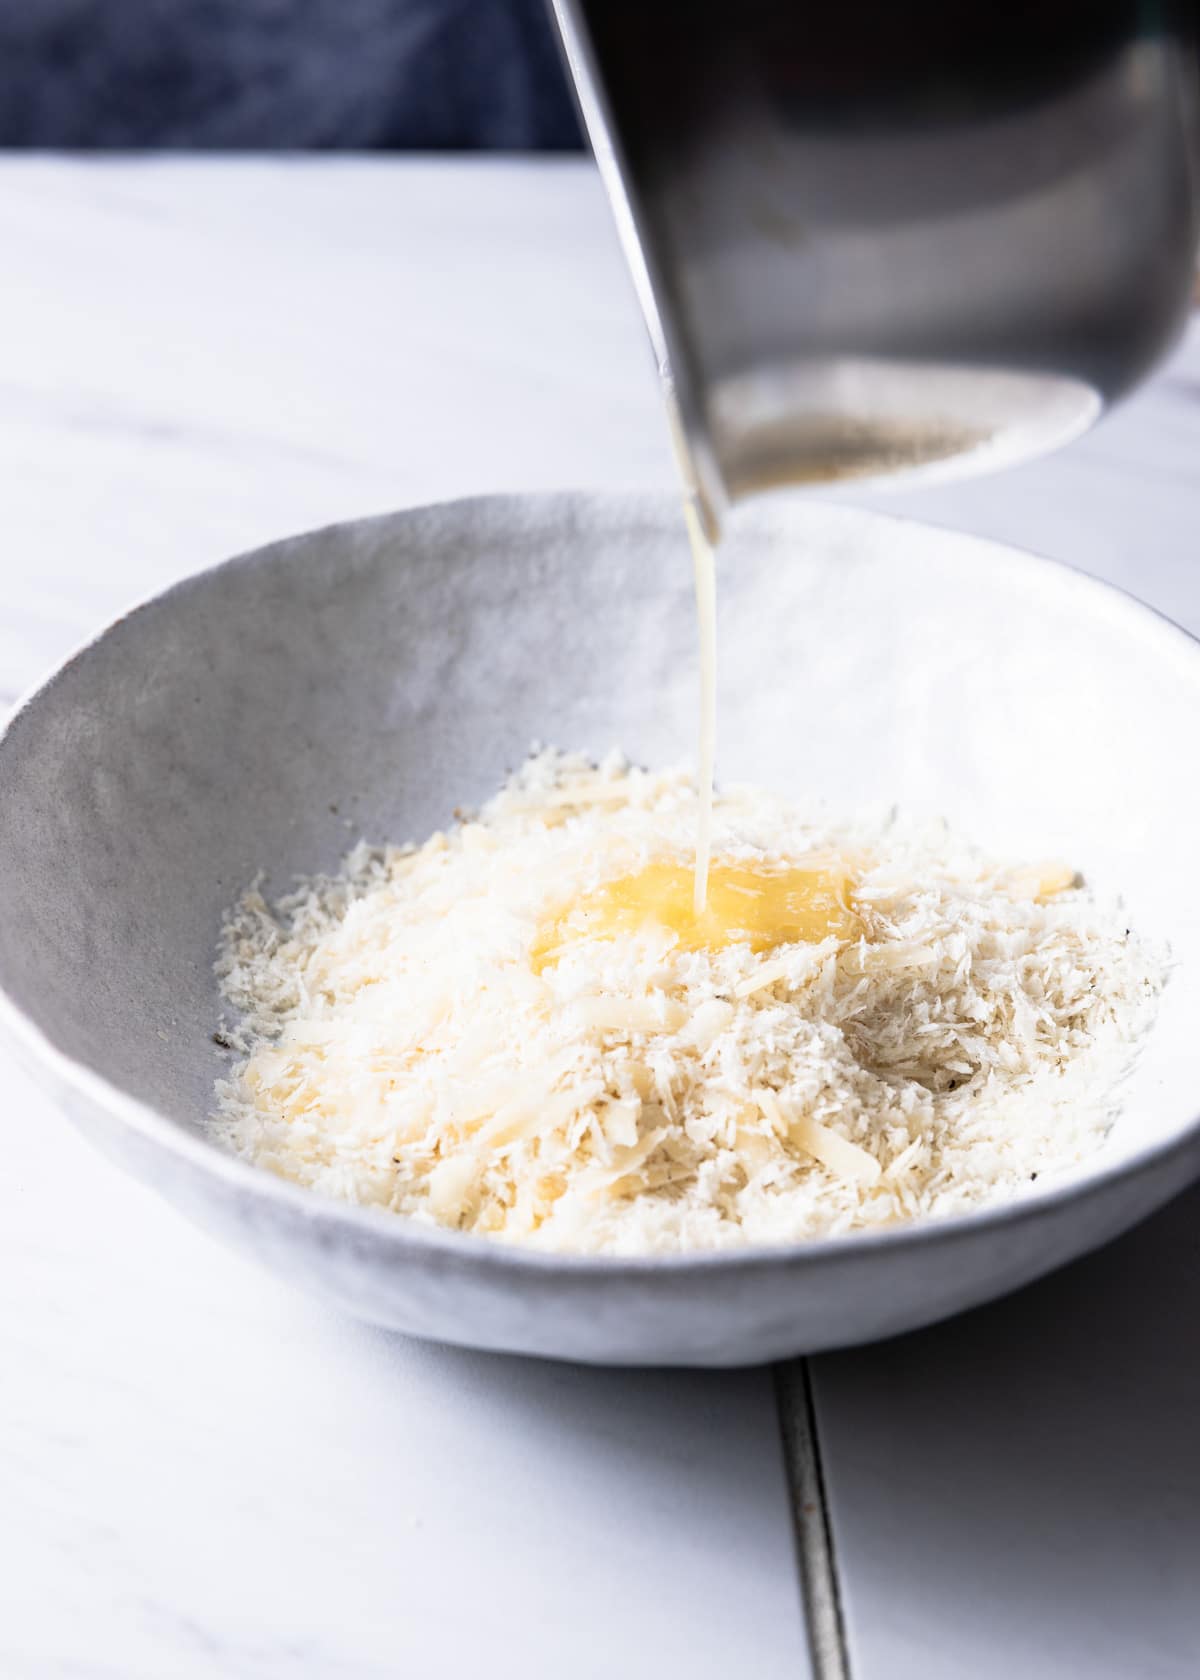 drizzlilng melted butter into a white bowl filled with panko breadcrumbs and parmesan cheese